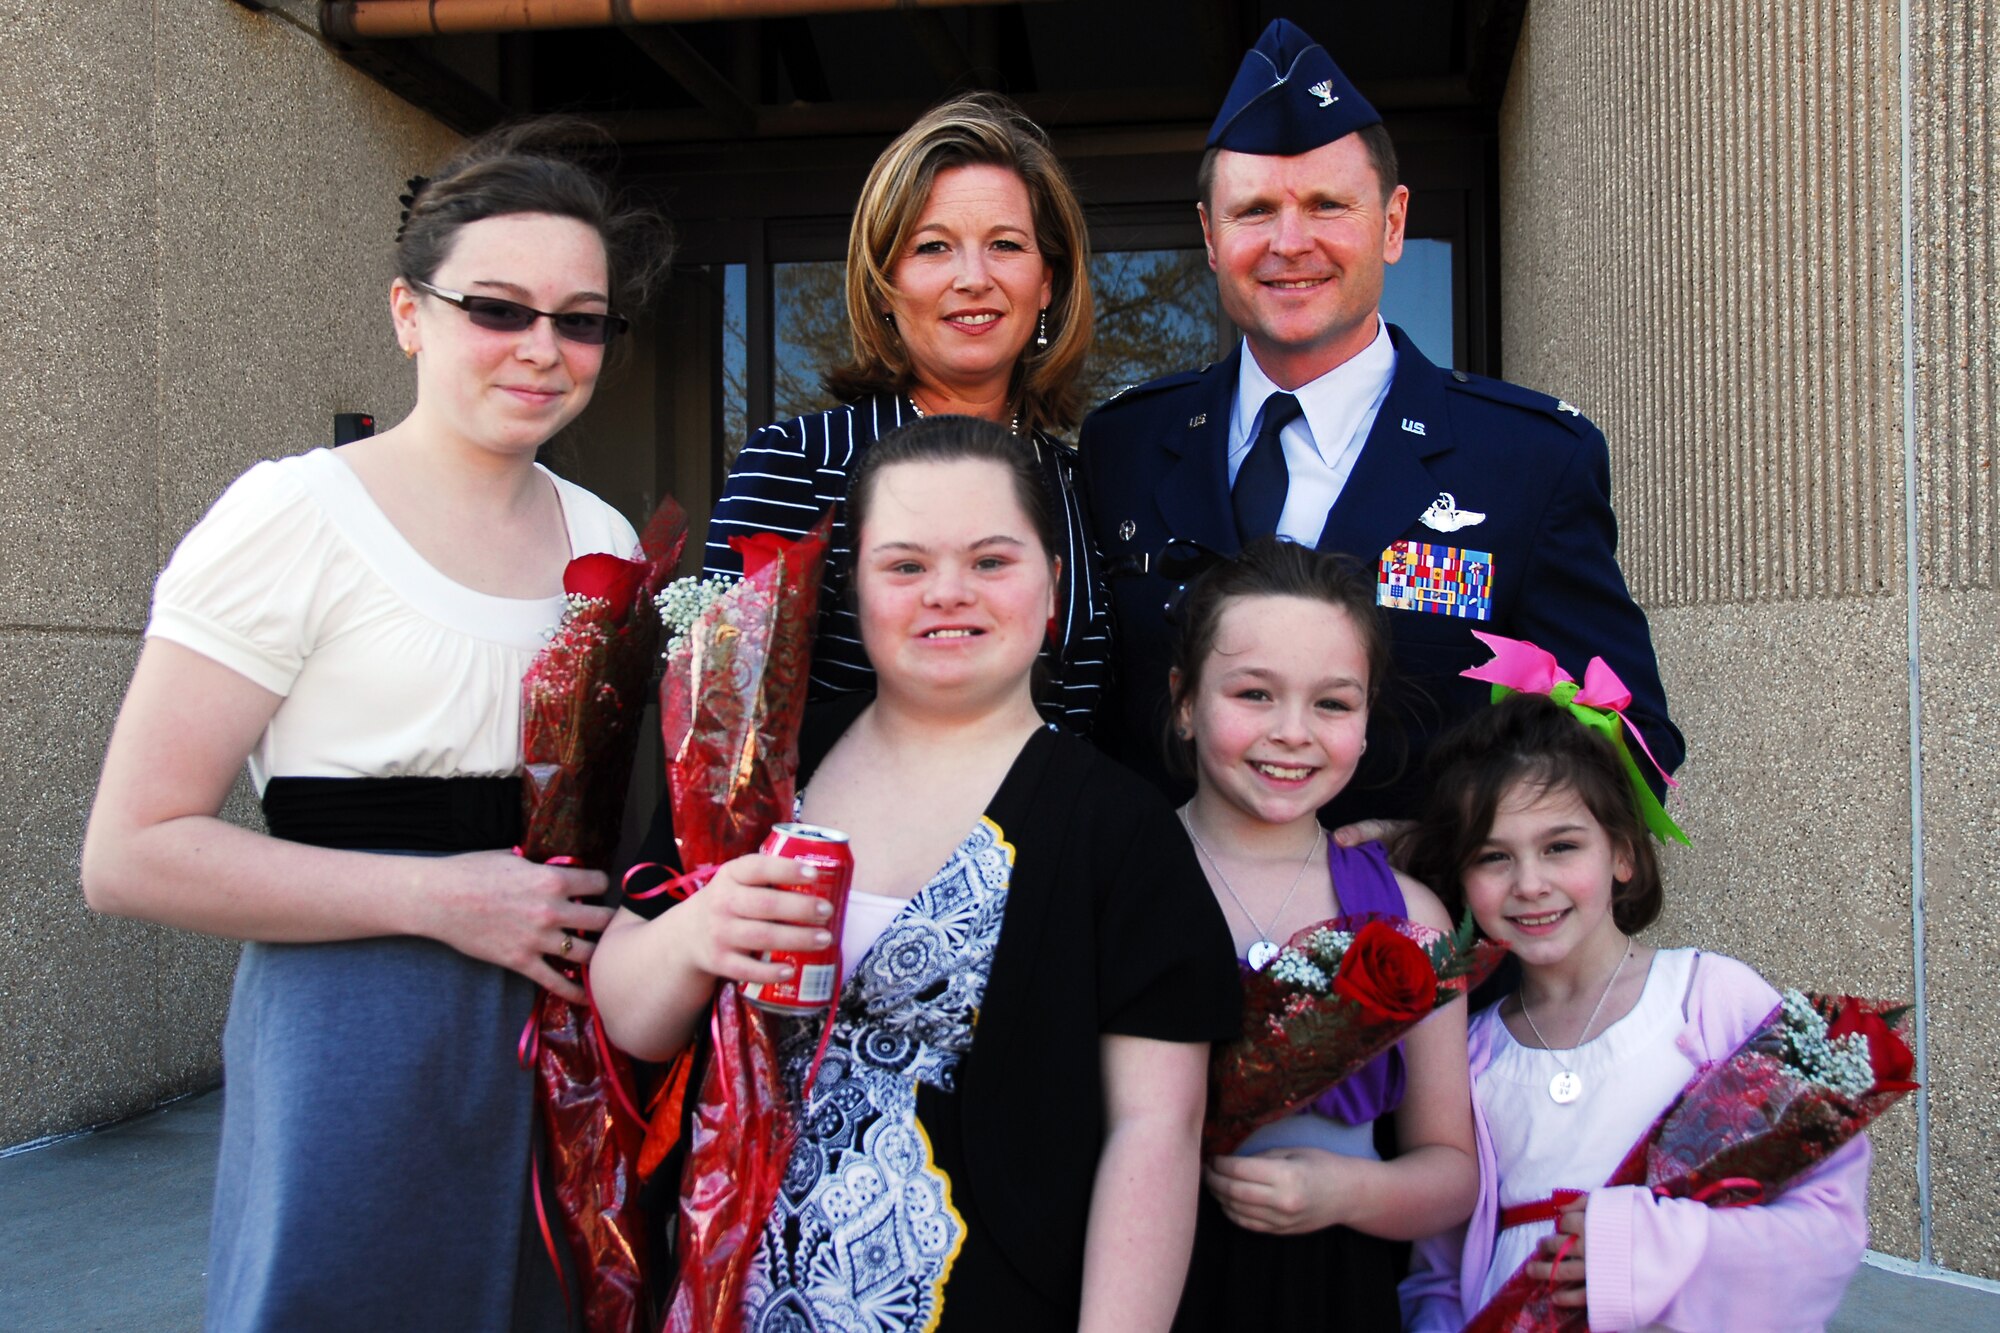 Col. Louis A. Patriquin, 403rd Operations Group, poses with wife Jerrilynn and four daughters after Colonel Patriquin's promotion ceremony. The girls were holding the roses their father gave them during the ceremony. Family and friends gathered to celebrate at the Bay Breeze Event Center.